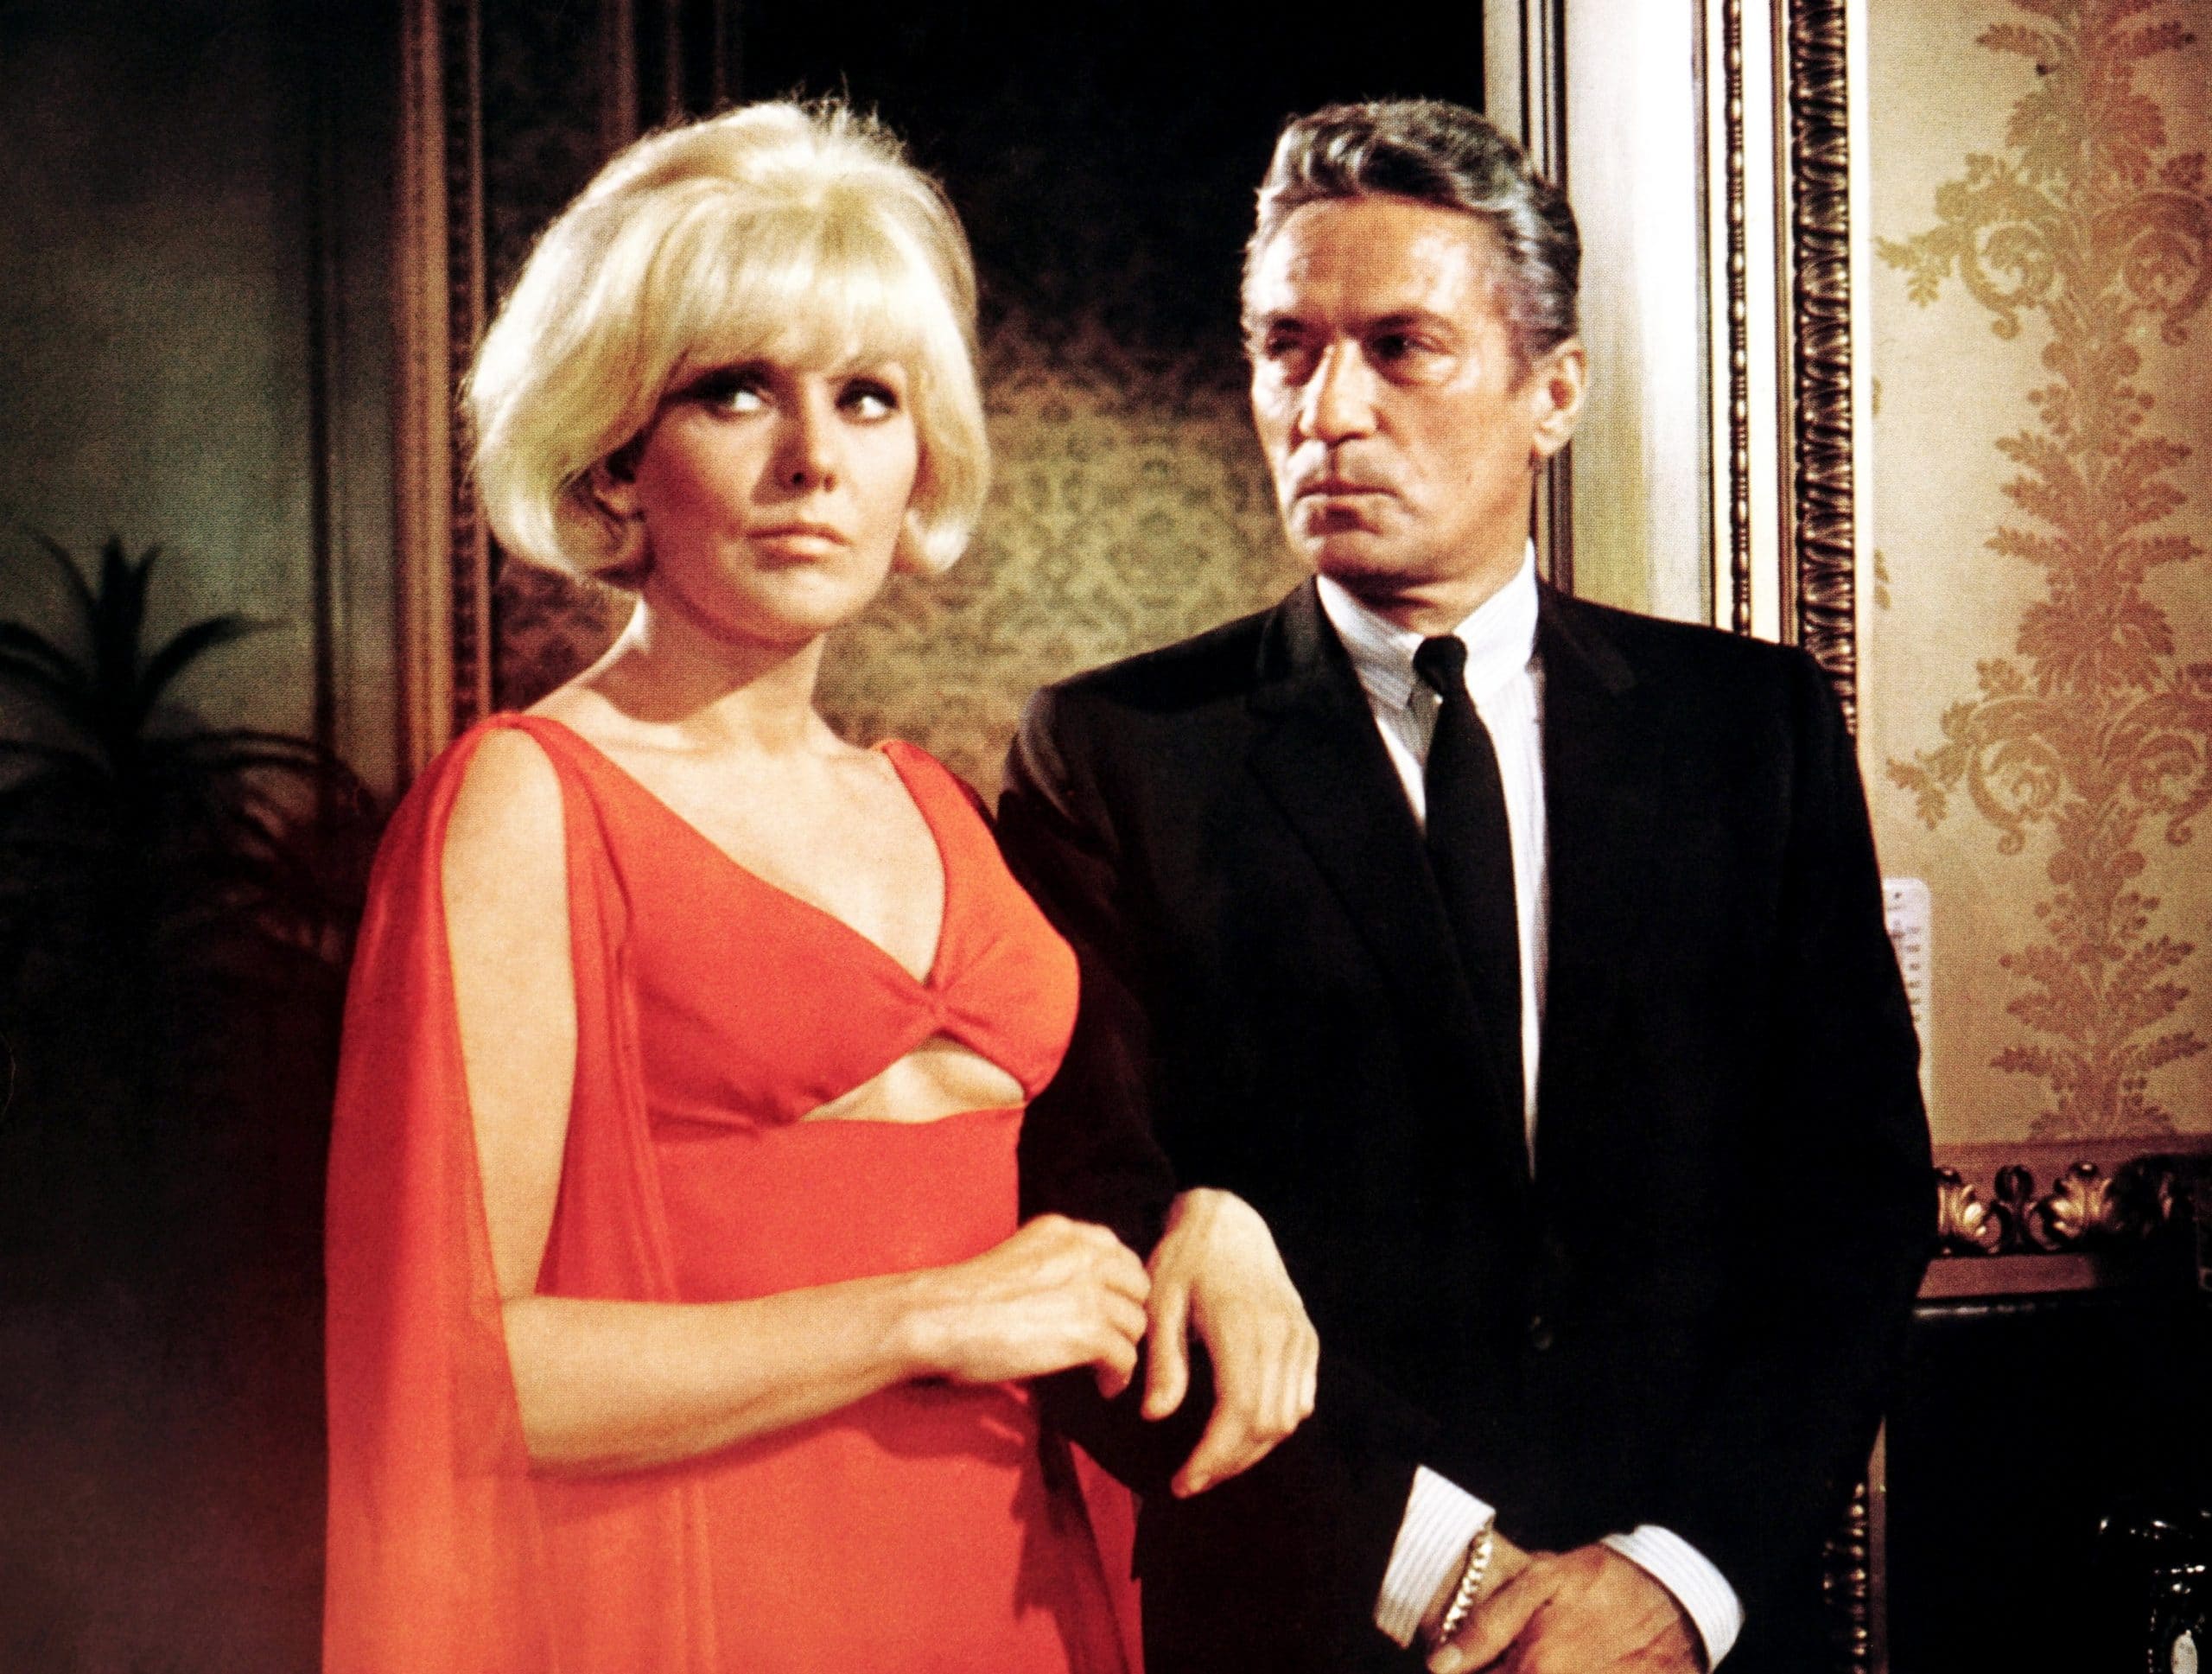 THE LEGEND OF LYLAH CLARE, from left, Kim Novak, Peter Finch